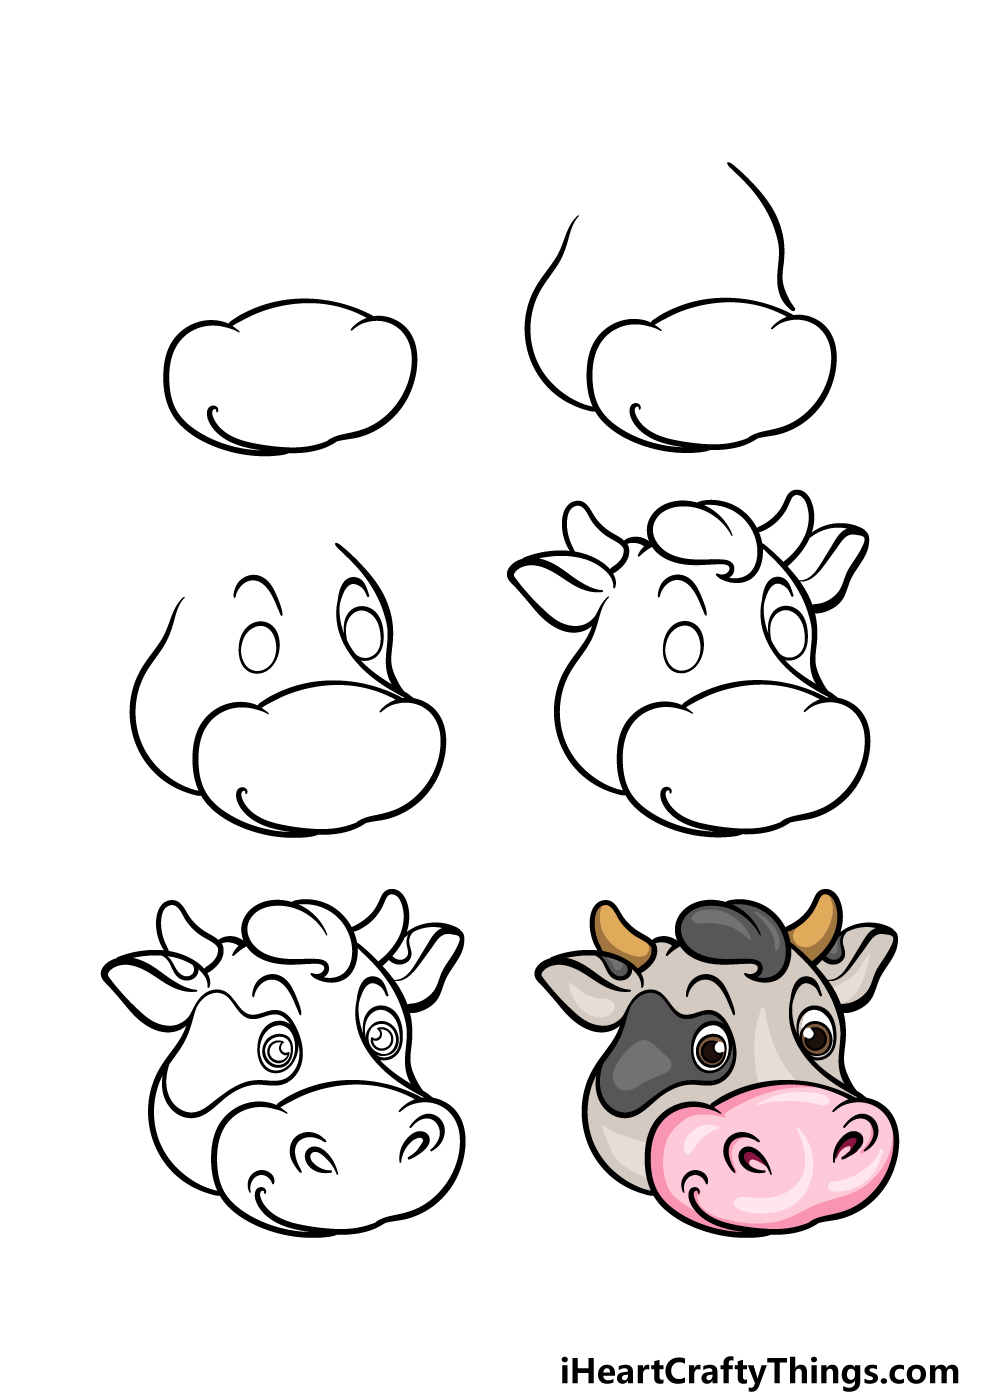 Cow's Face Drawing - How To Draw A Cow's Face Step By Step